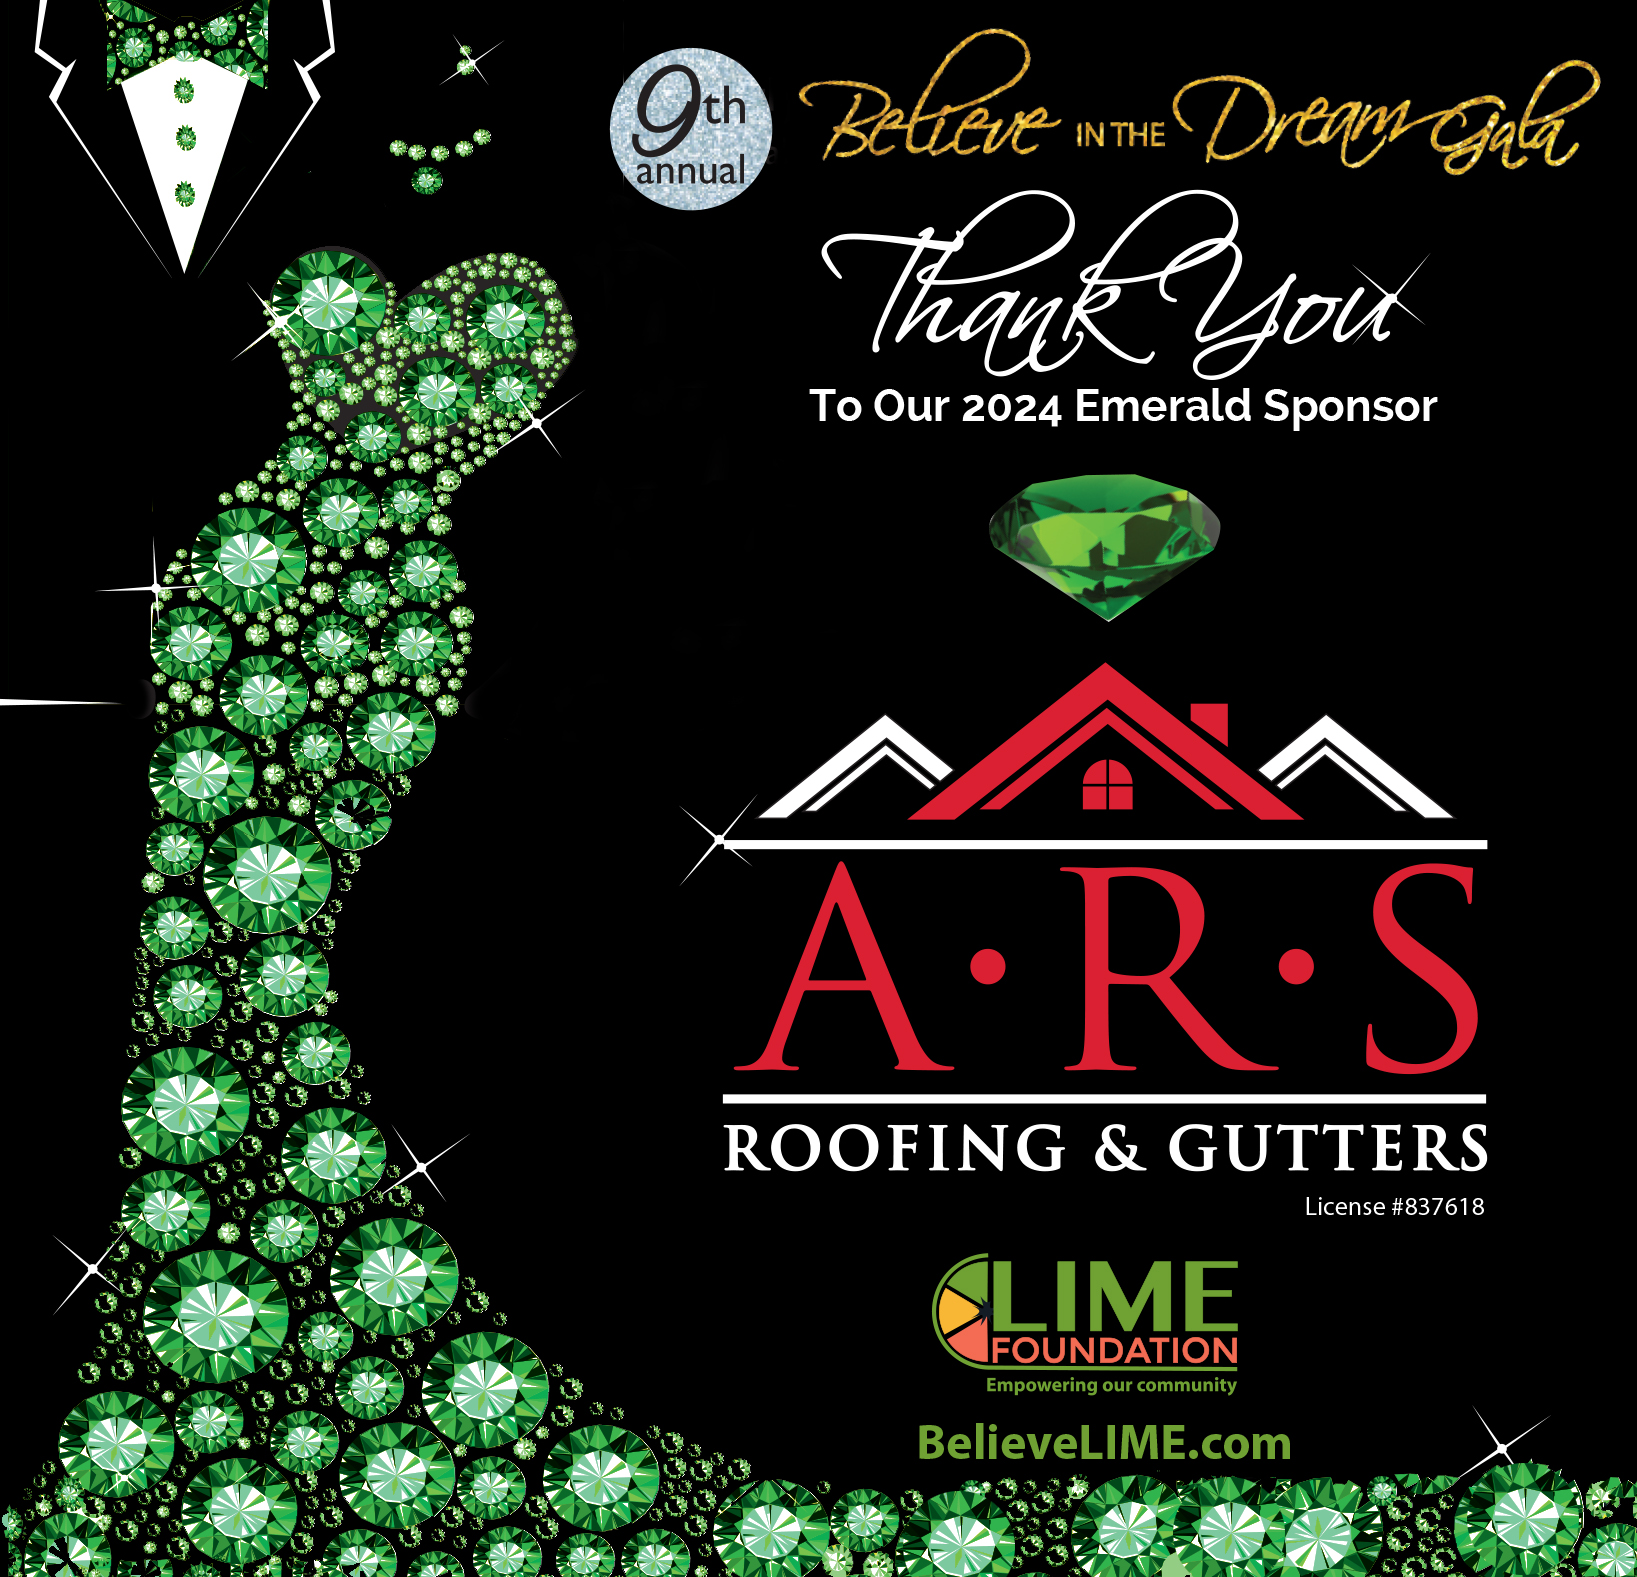 Promotional graphic for the "Believe The Dream 2024" gala event thanking the emerald sponsor, featuring an abstract green emerald design and sponsor logos.